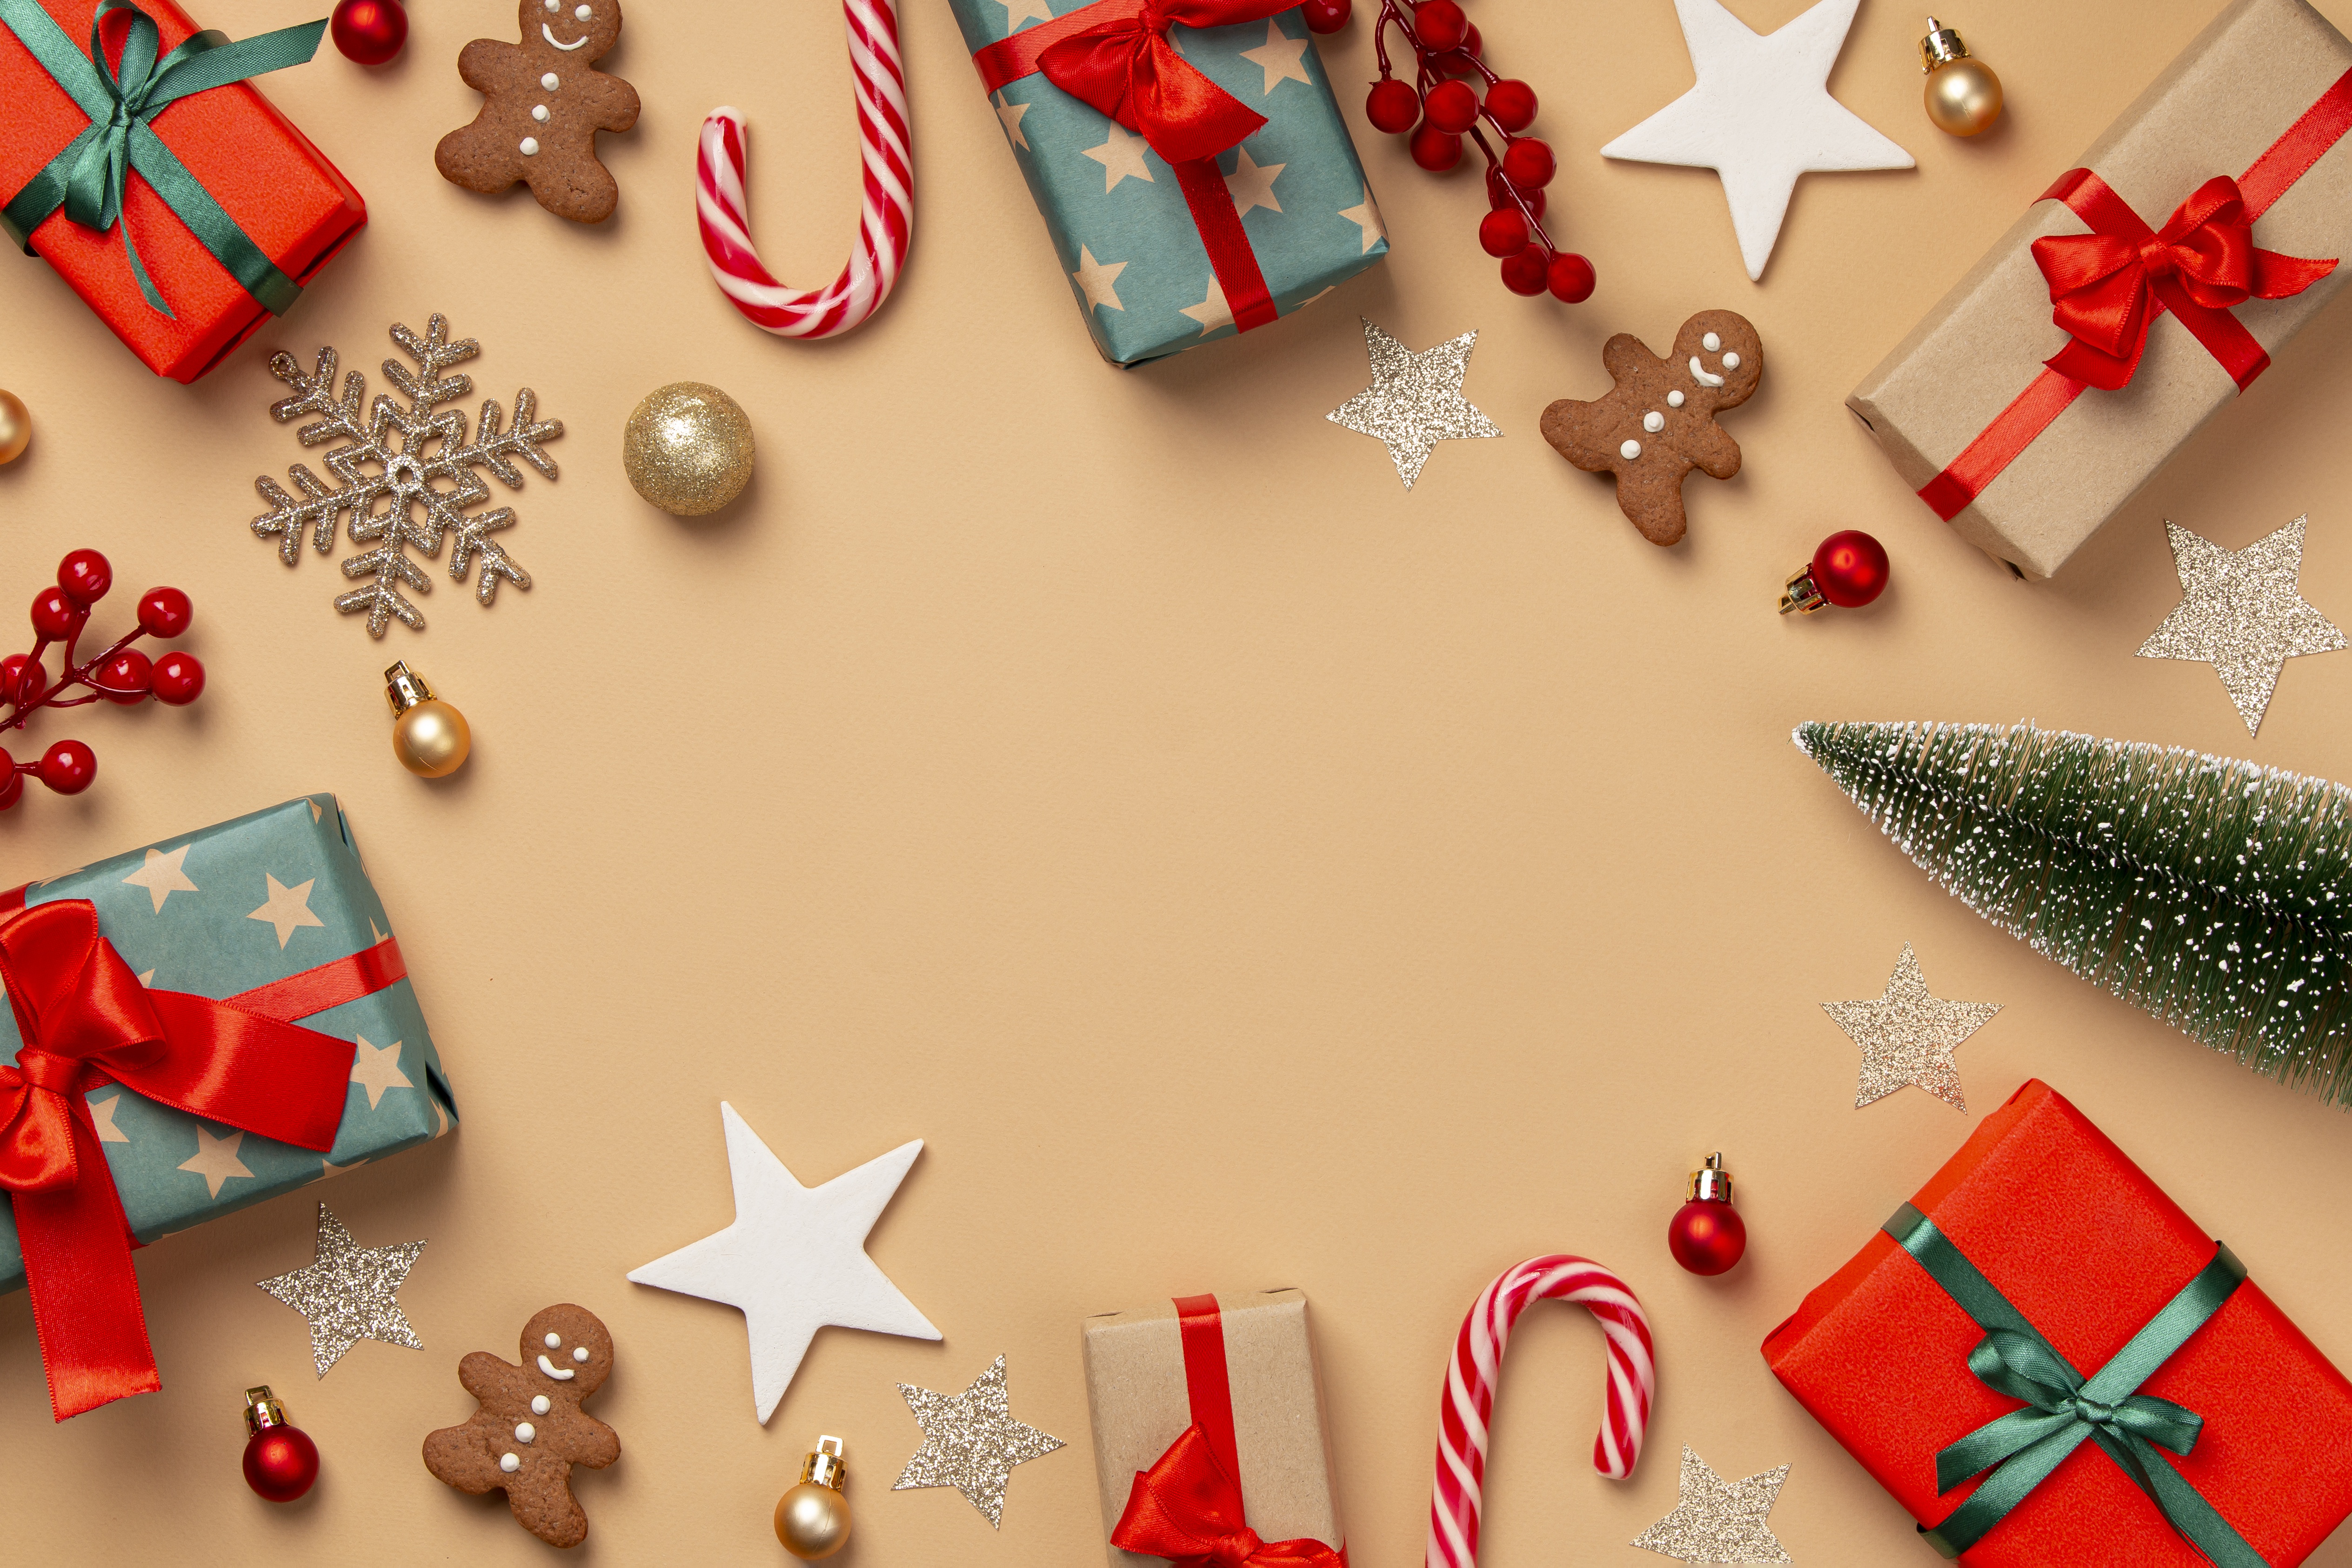 Wallpaper stars, holiday, box, gift, Wallpaper, new year, Christmas, blur  for mobile and desktop, section праздники, resolution 3700x2500 - download